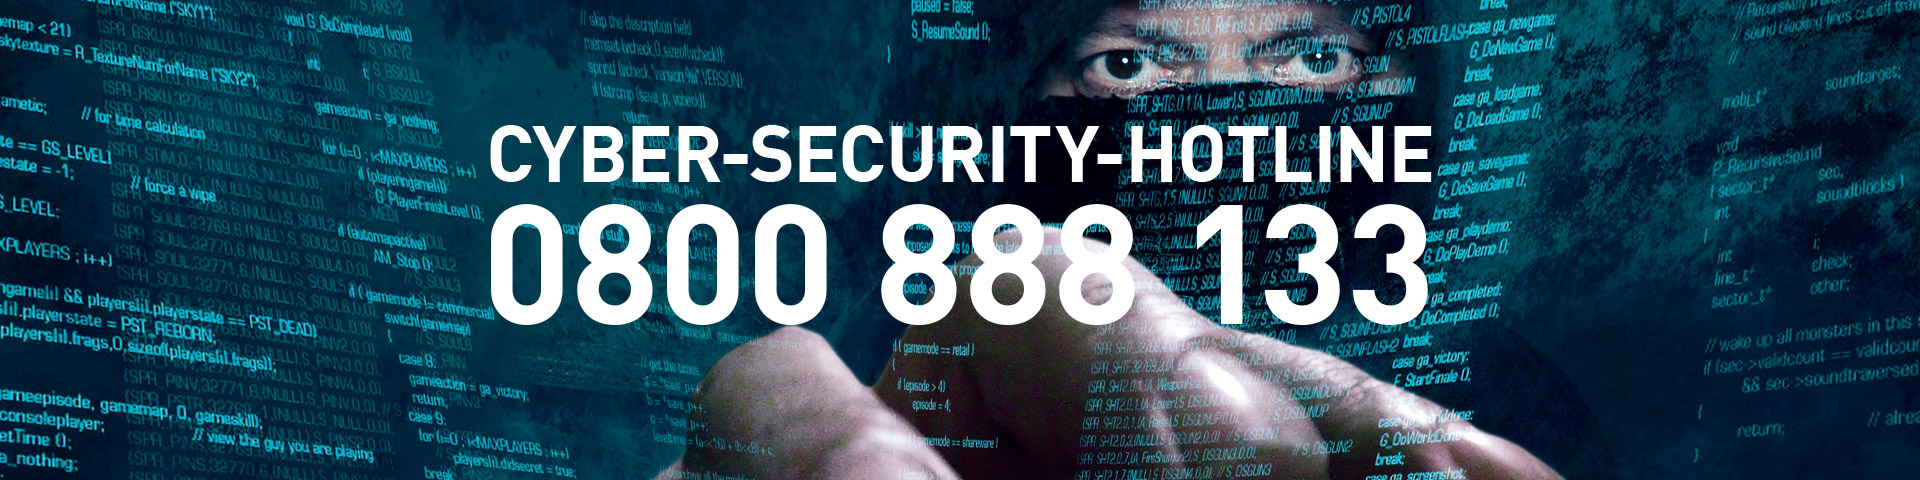 Cyber-Security-Hotline Sujet